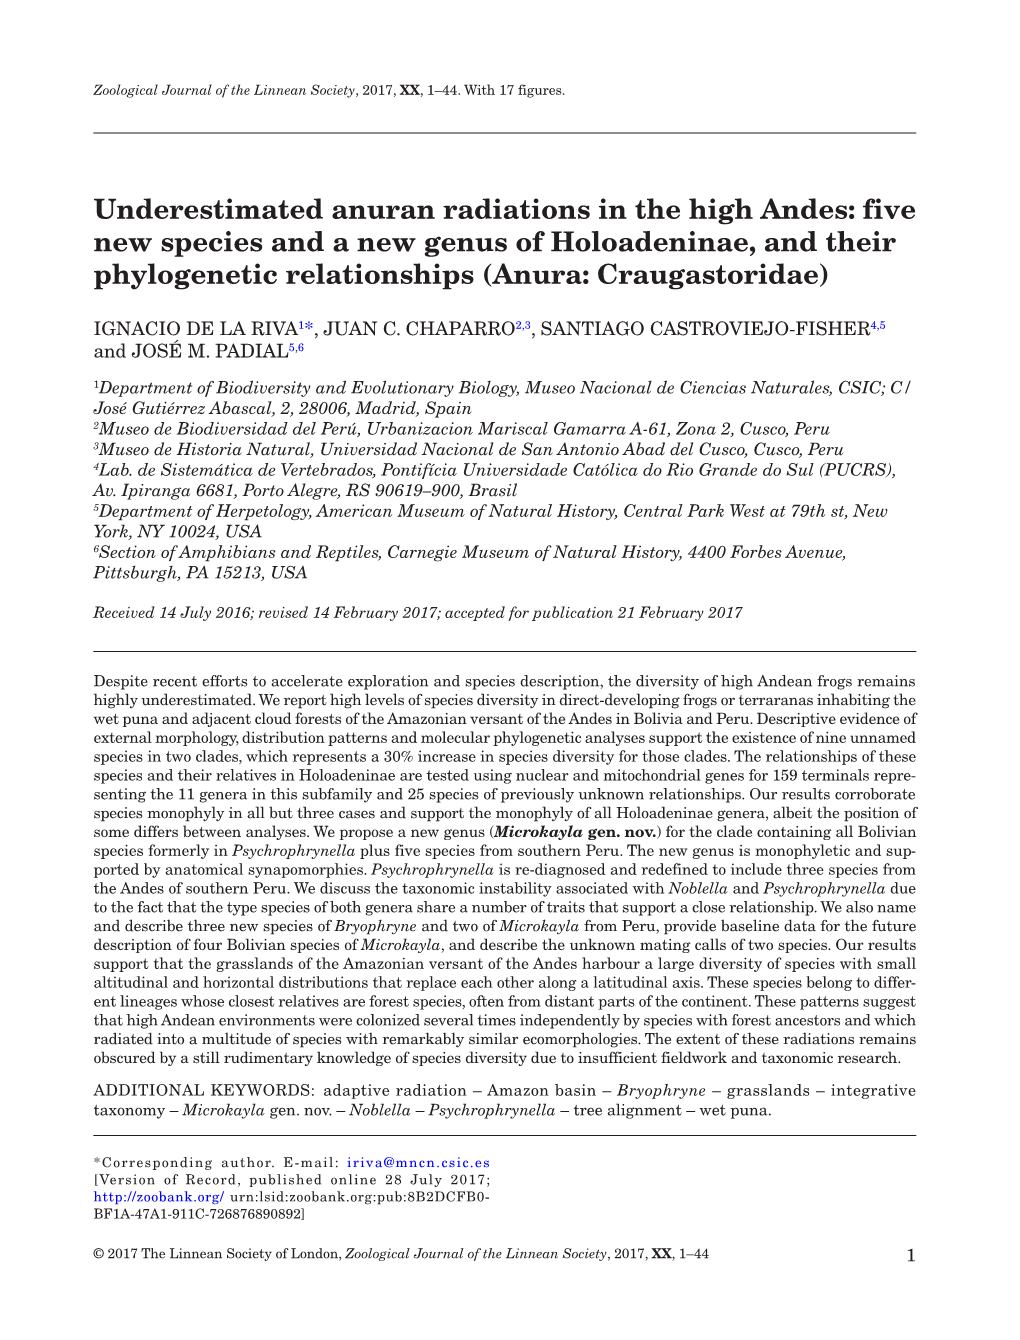 Underestimated Anuran Radiations in the High Andes: Five New Species and a New Genus of Holoadeninae, and Their Phylogenetic Relationships (Anura: Craugastoridae)